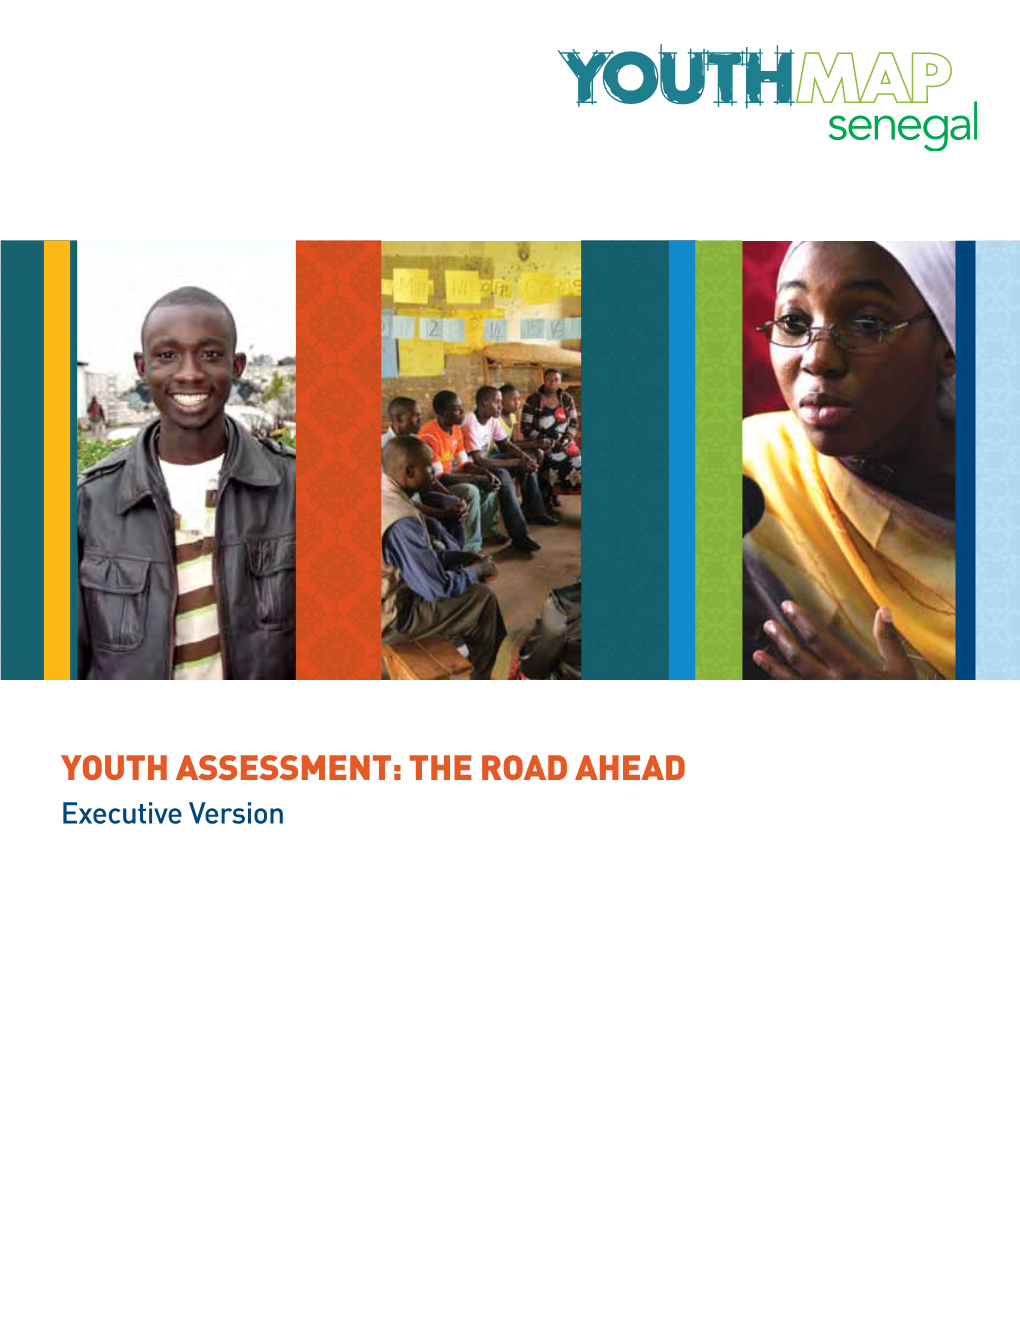 Youthmap Senegal: Youth Assessment—The Road Ahead